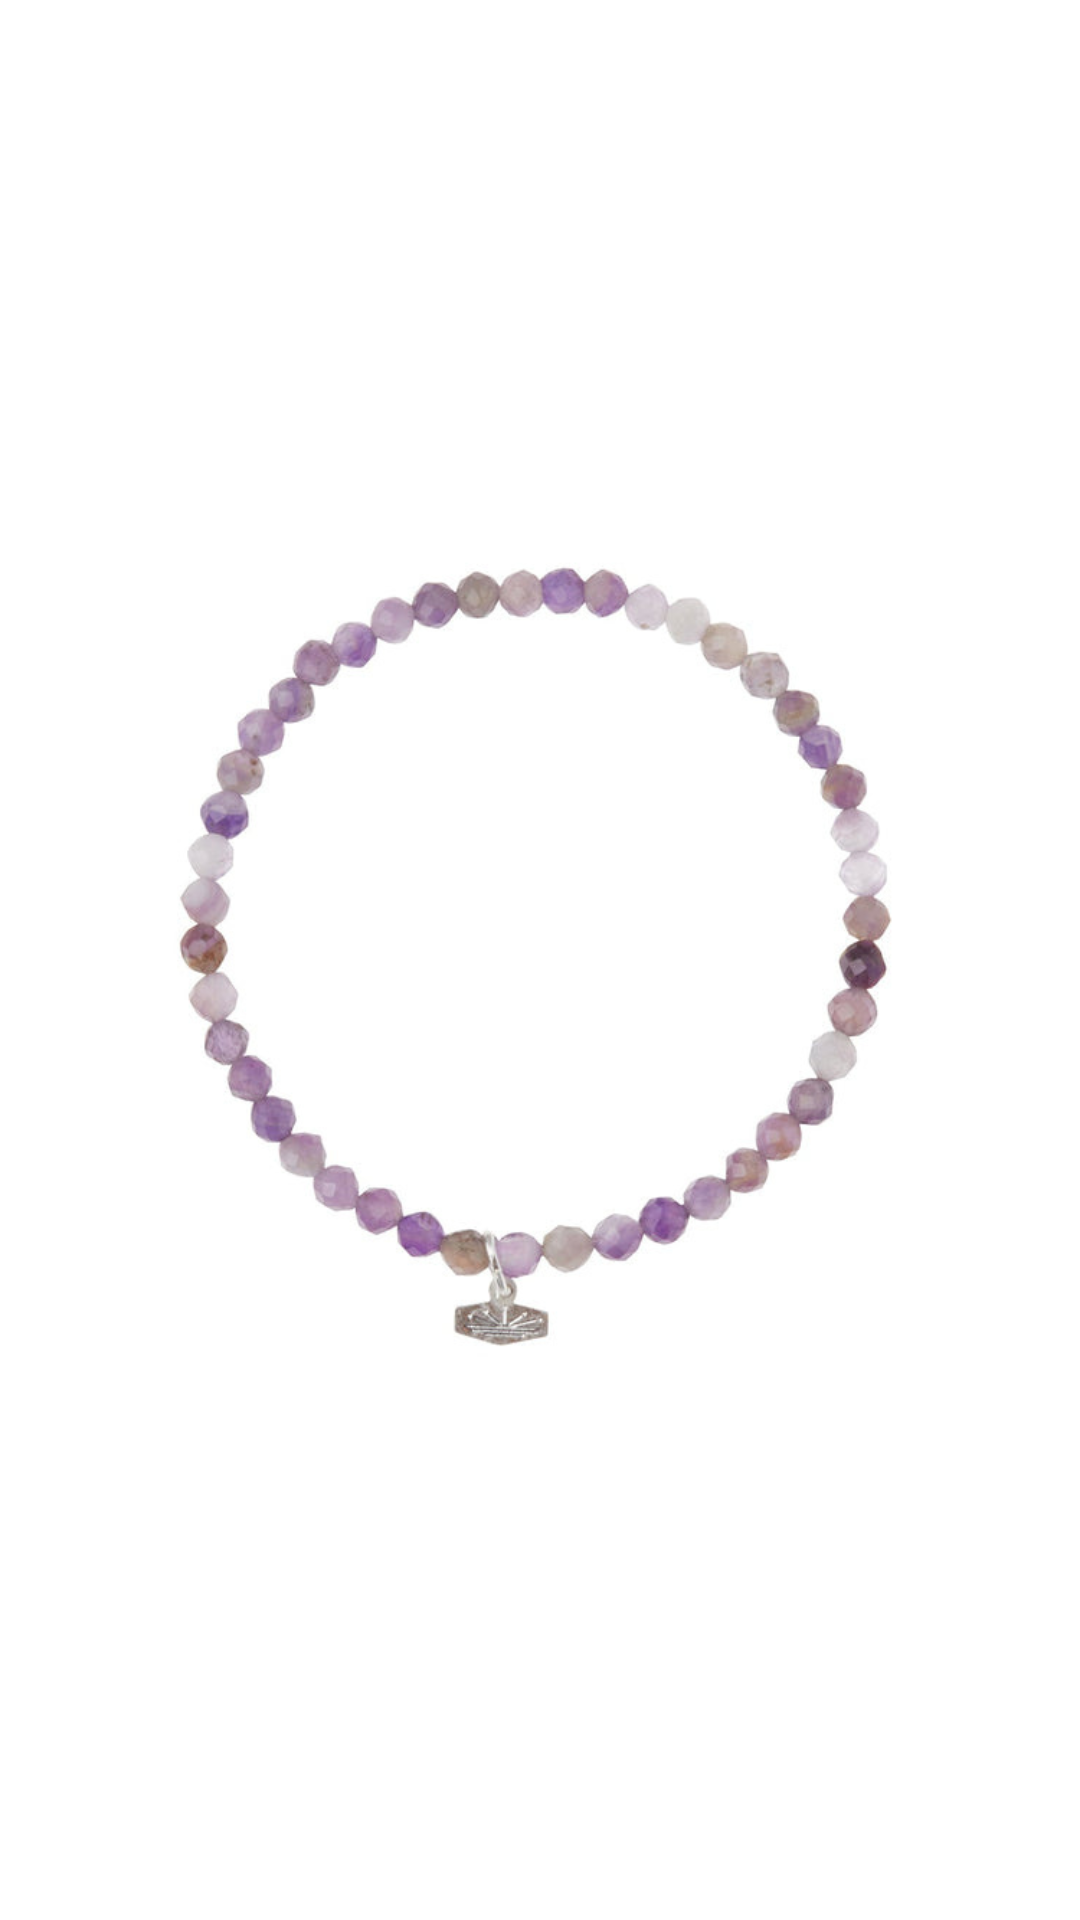 Mini Faceted Stone Stacking Bracelet - Amethyst/Silver